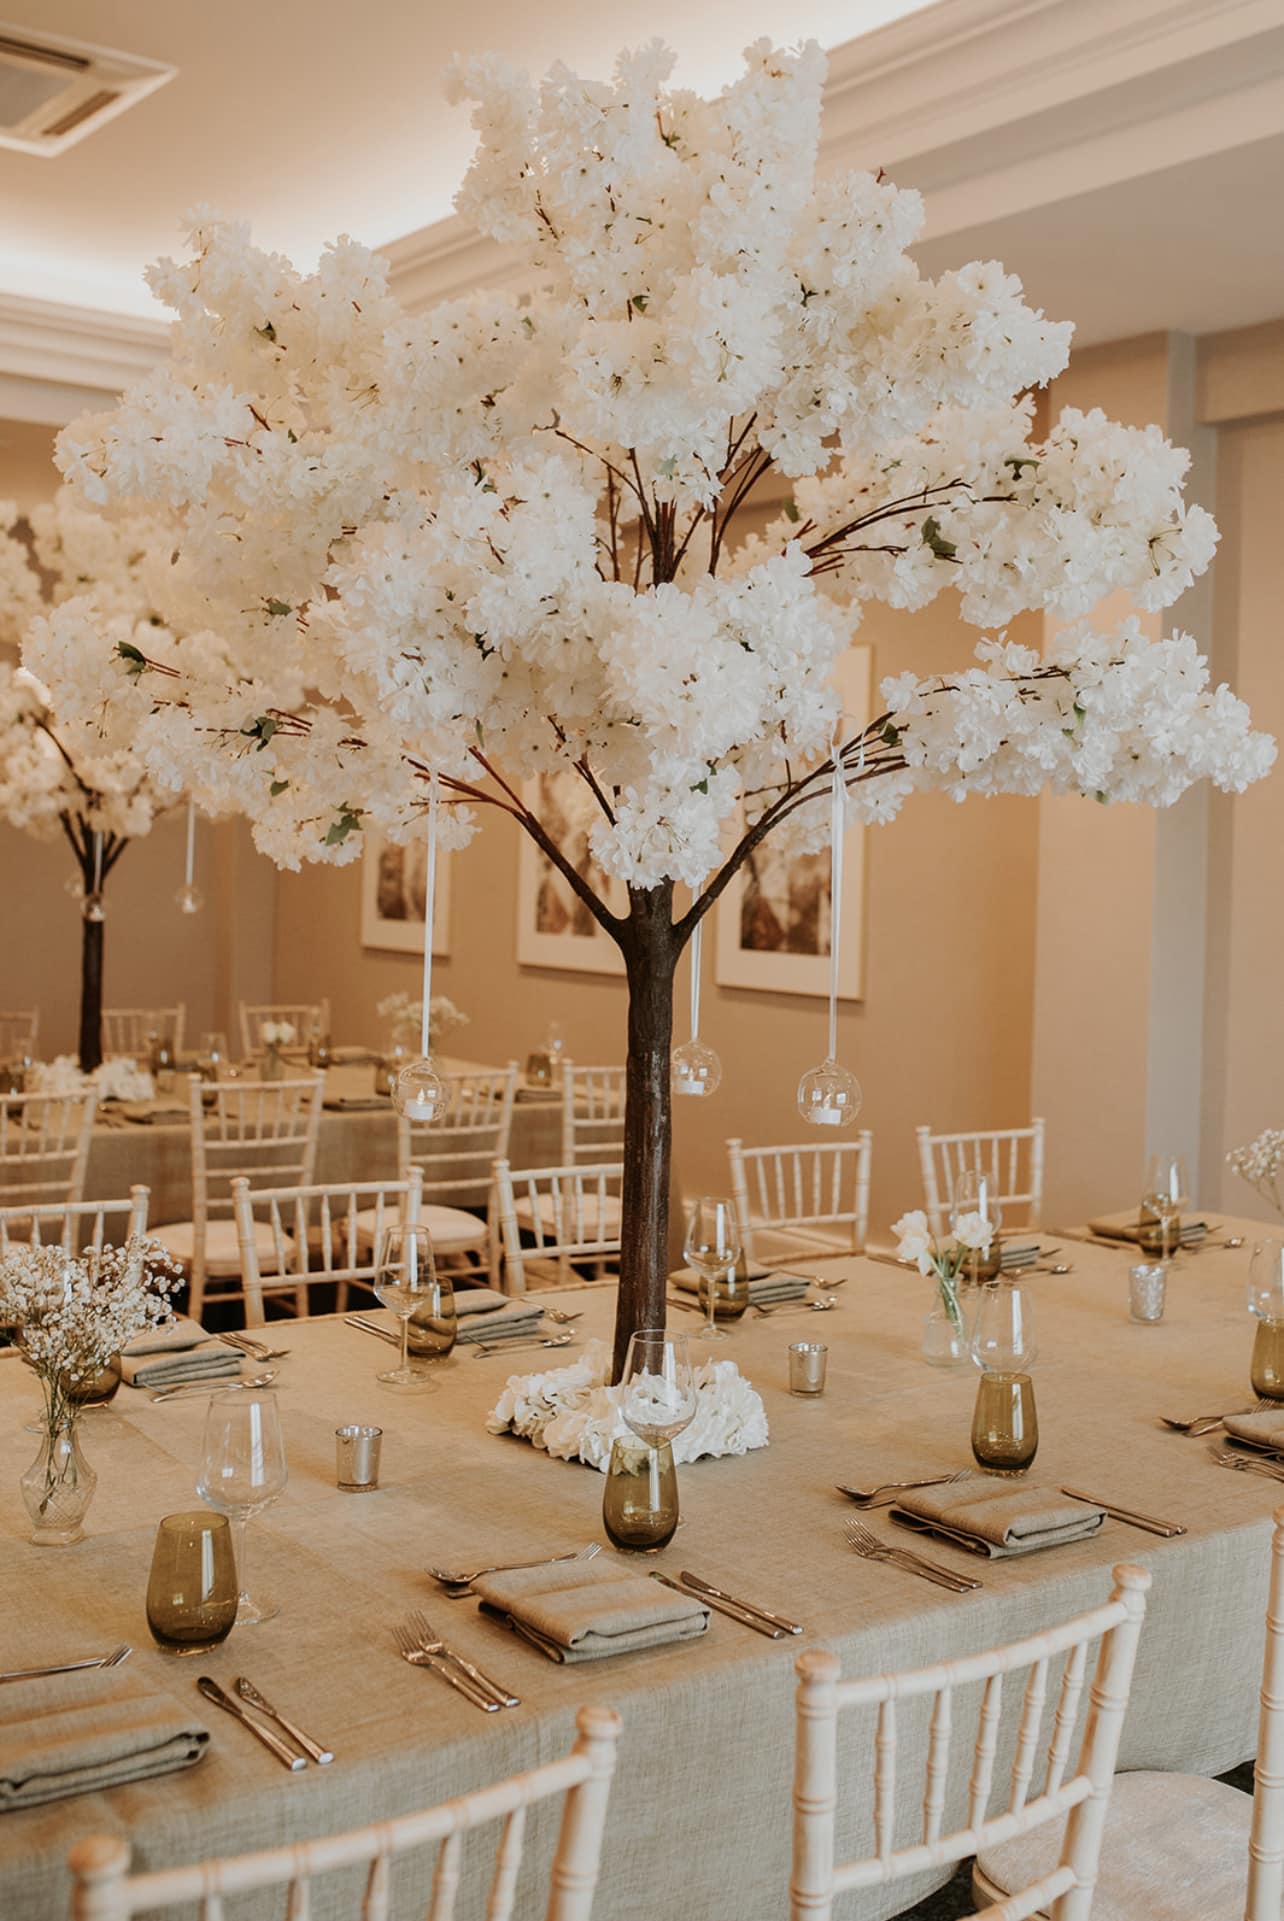 Green Trees for Events and Weddings - Natural Looking Artificial Trees  Event trees